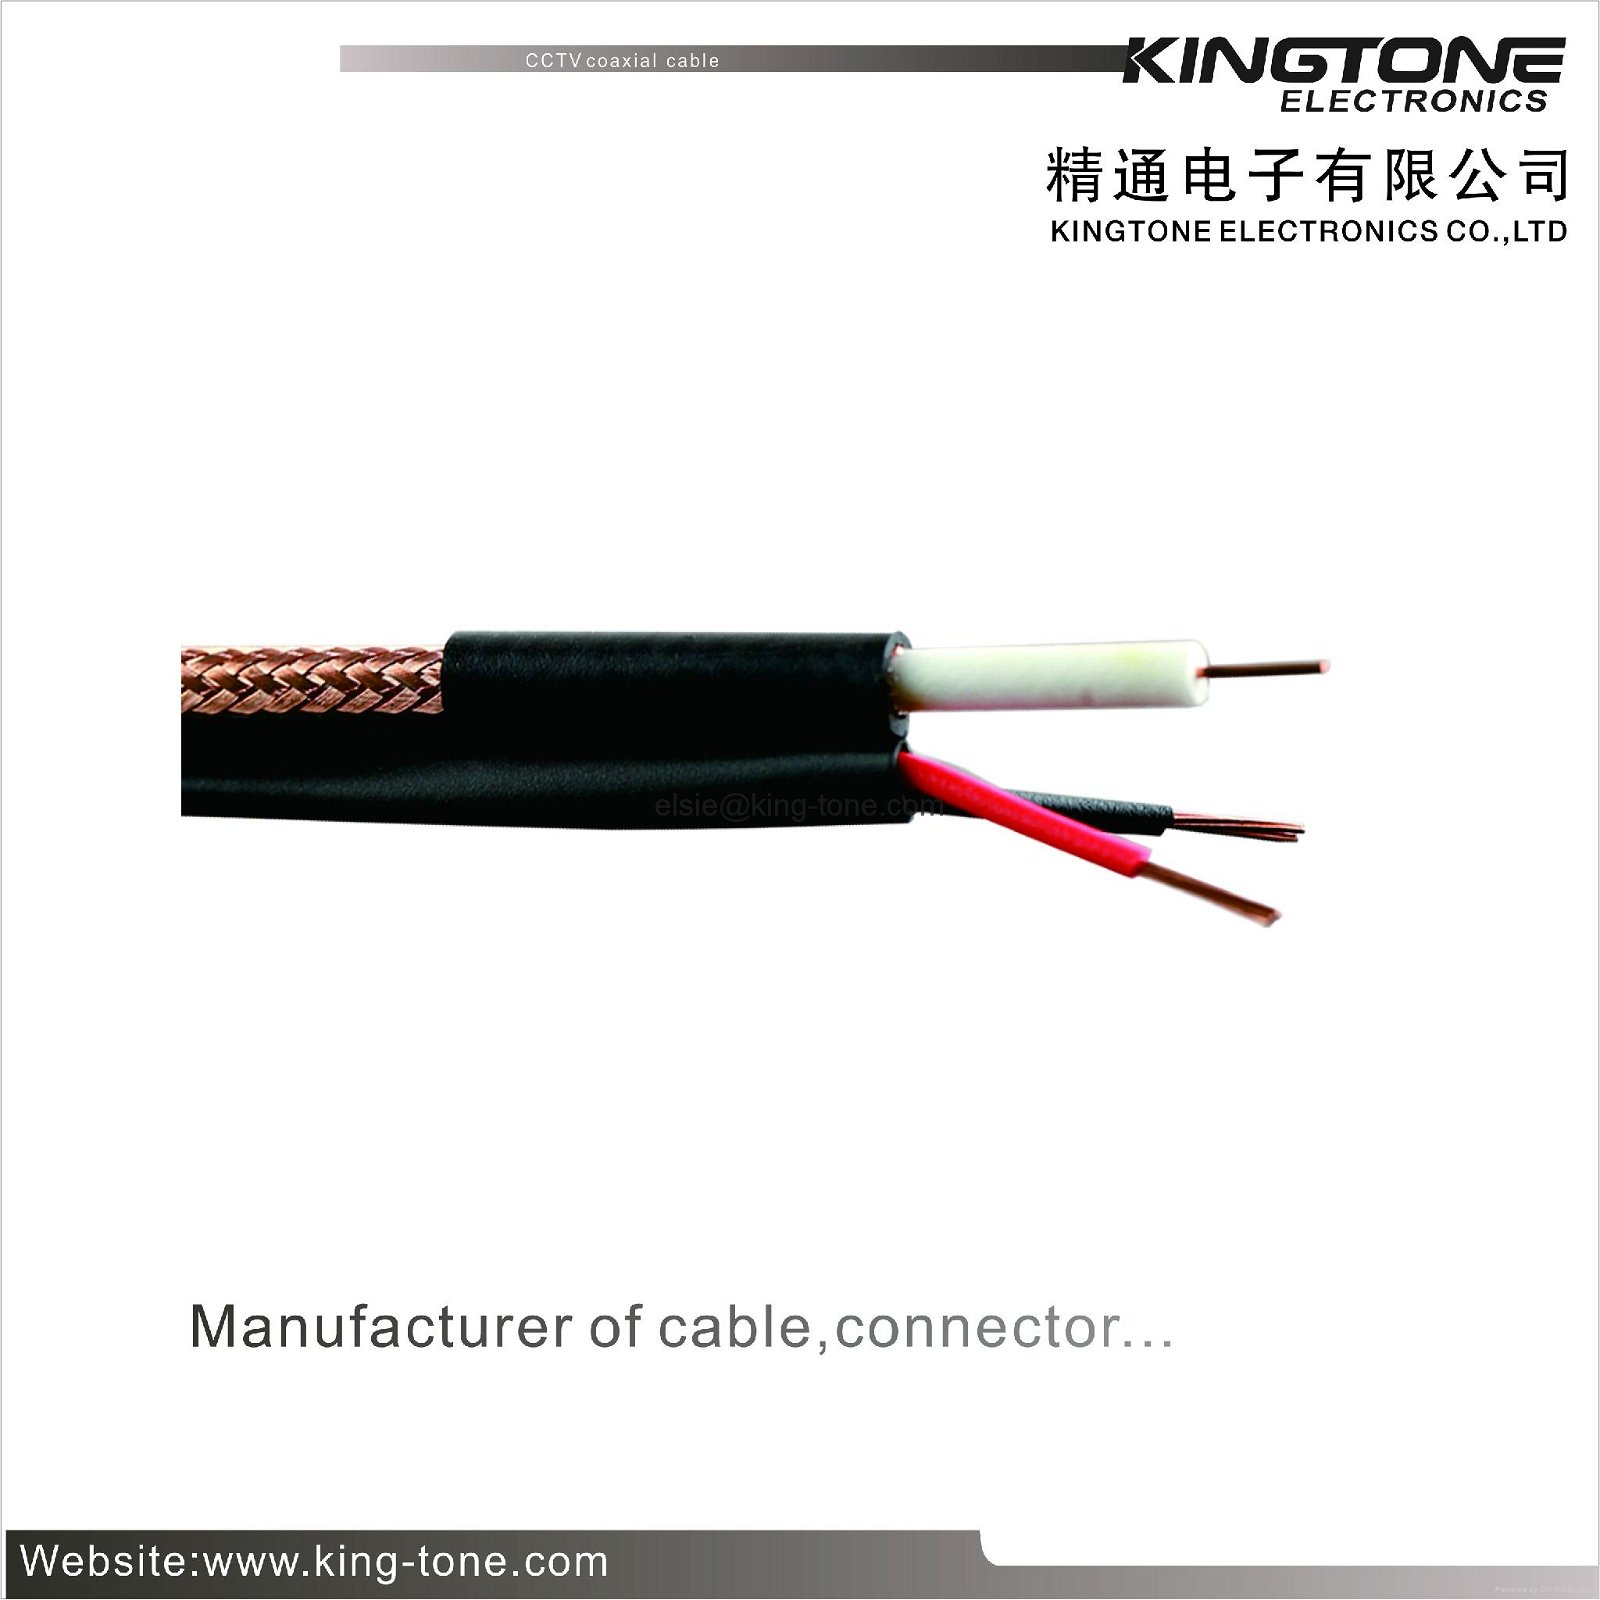 CCTV Coaxial Cable for Digital Video Composite Cable 24 × 0.20mm CCA Power 